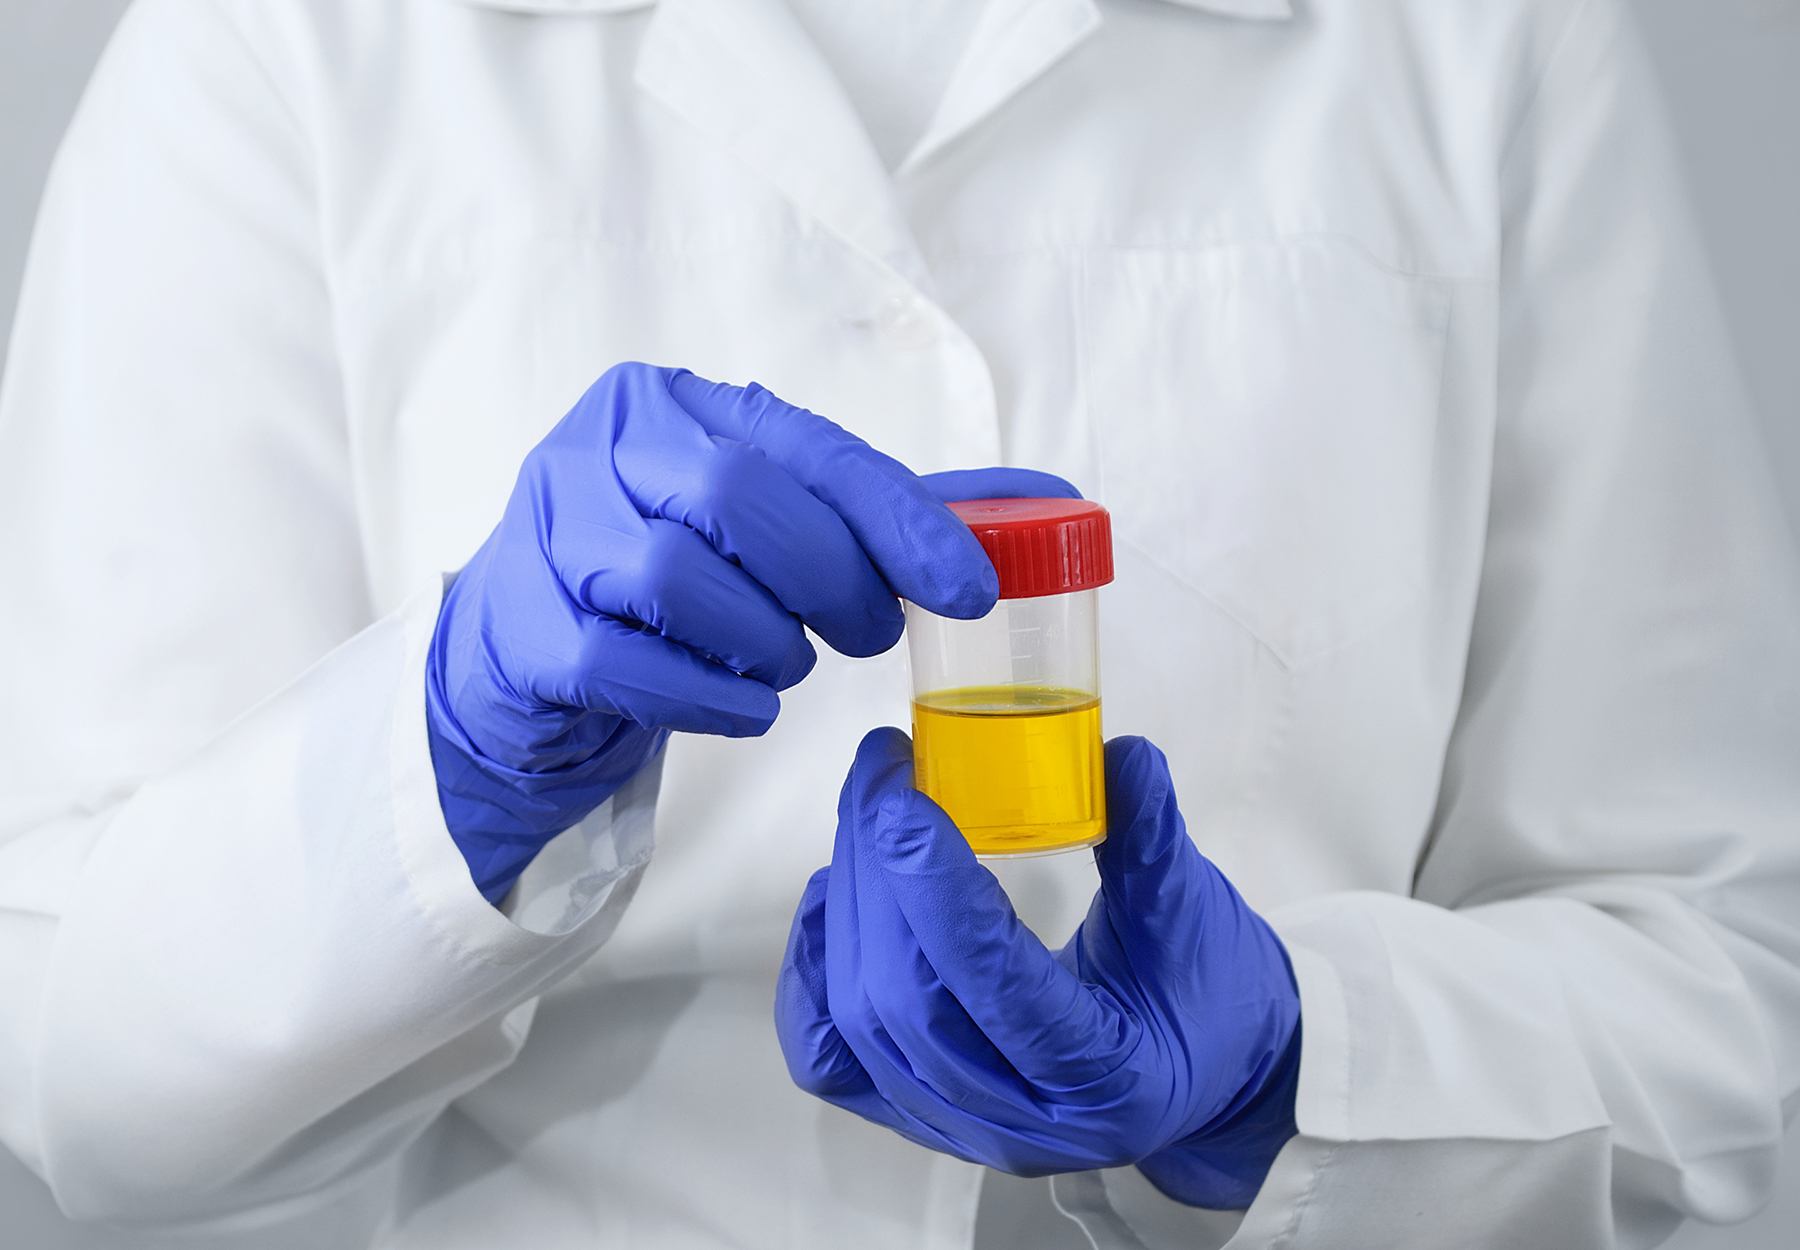 Closeup of laboratory professional's purple-gloved hands holding a urine sample. The lab worker has on a white lab coat as well. iStock image.